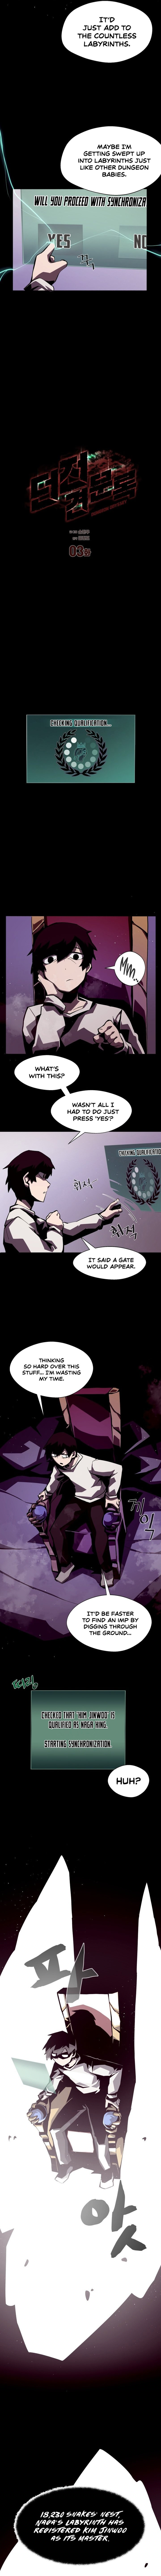 Dungeon Odyssey - Chapter 3 Page 6